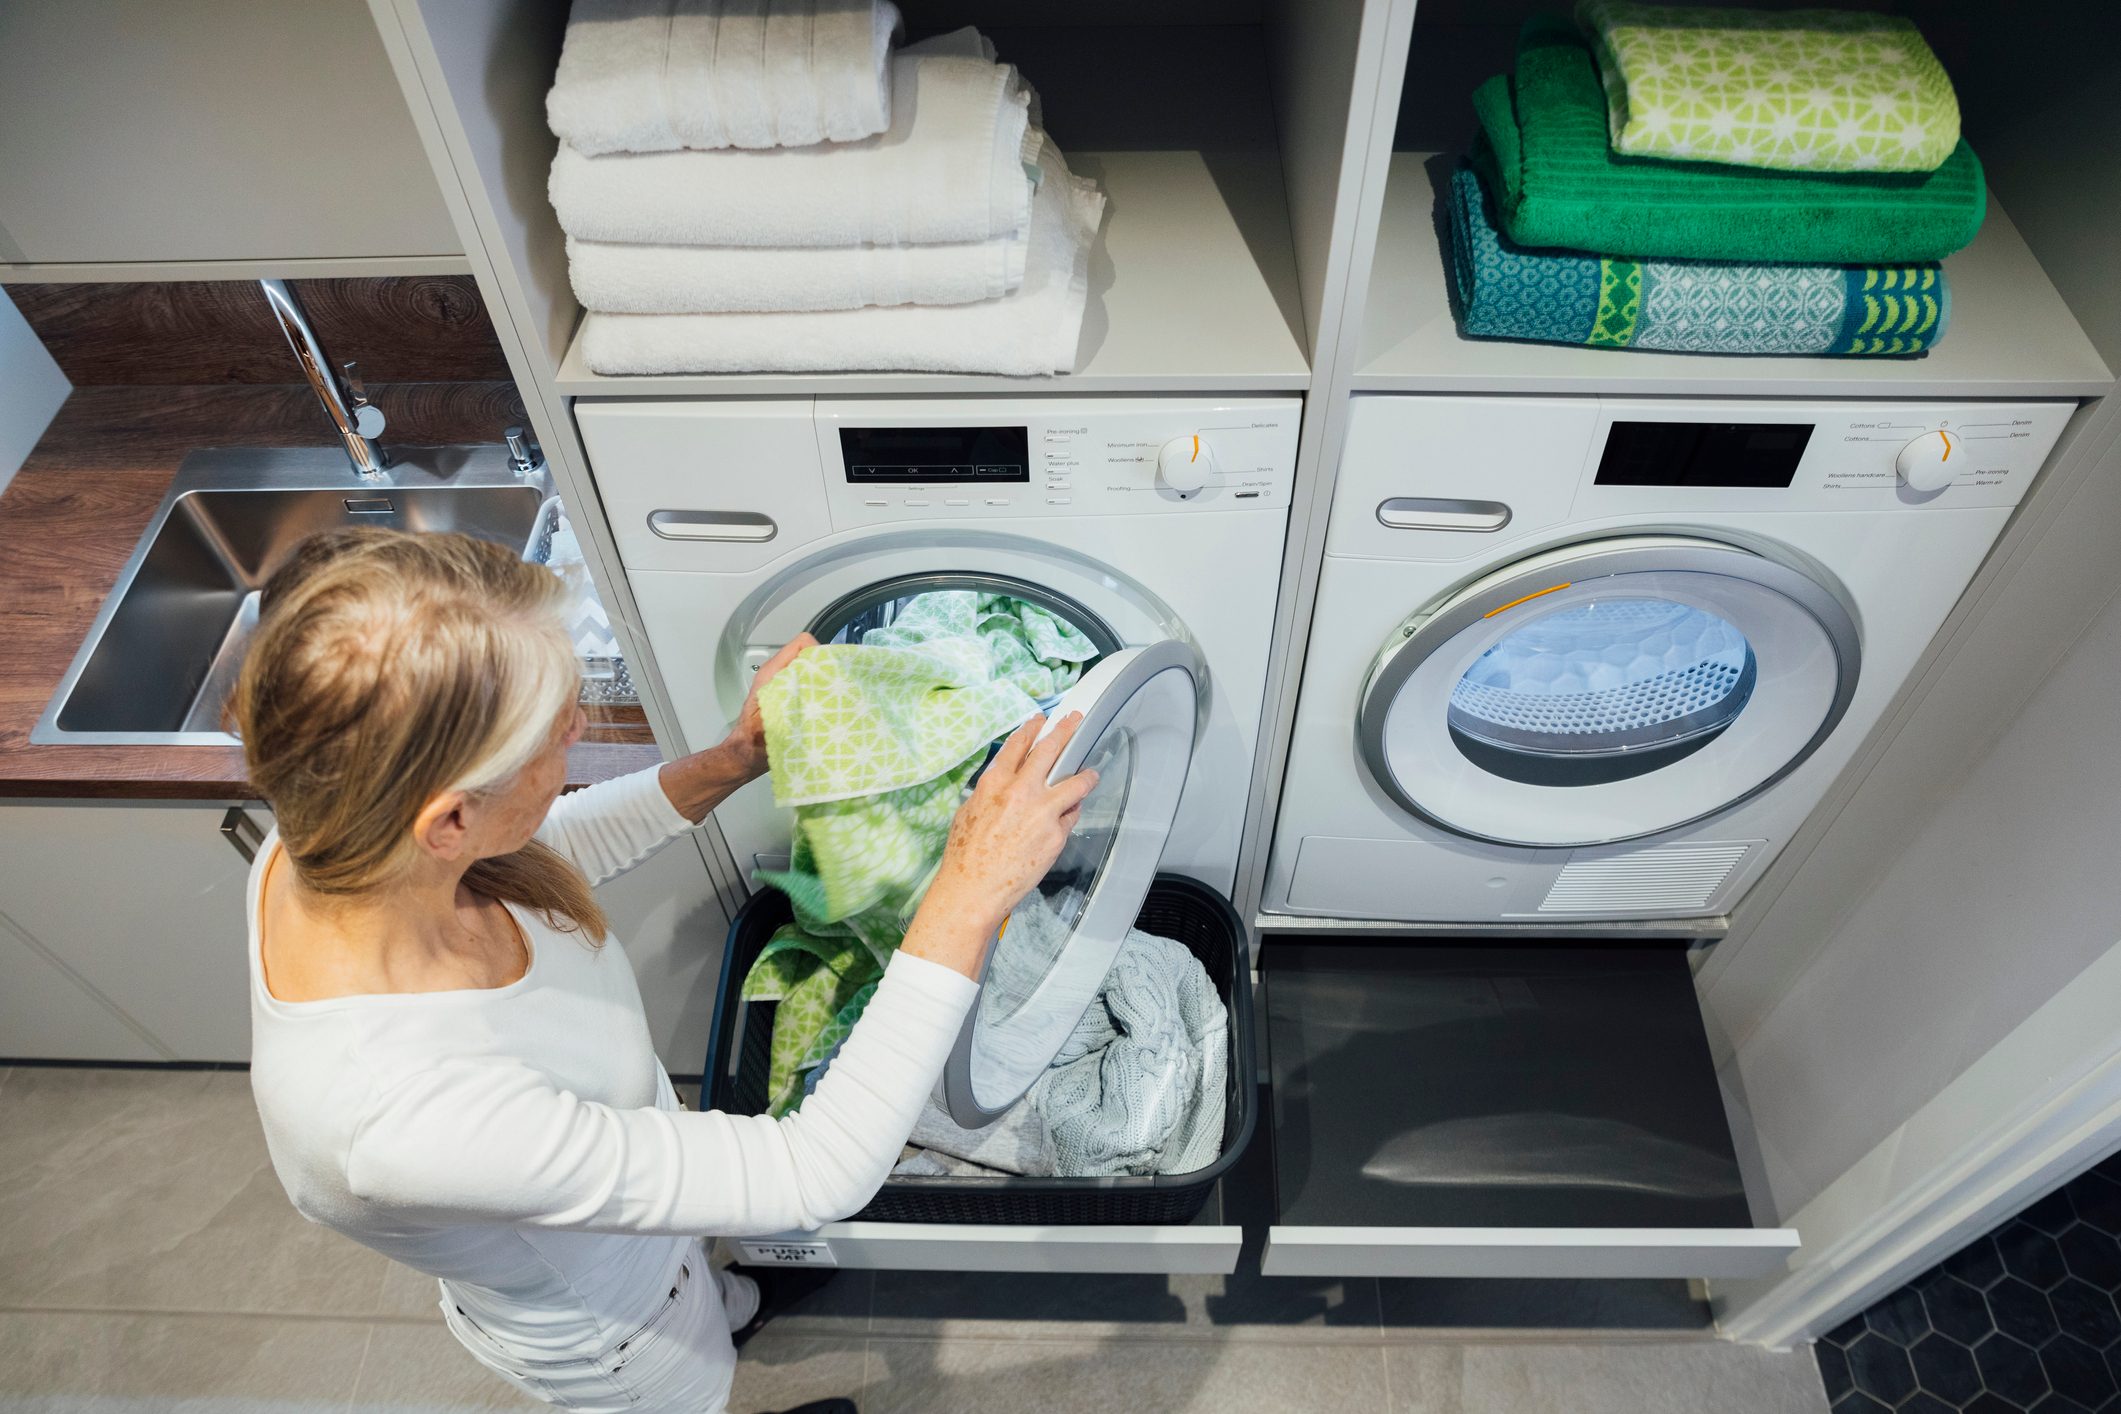 How To Keep Towels Soft - Laundry Tips